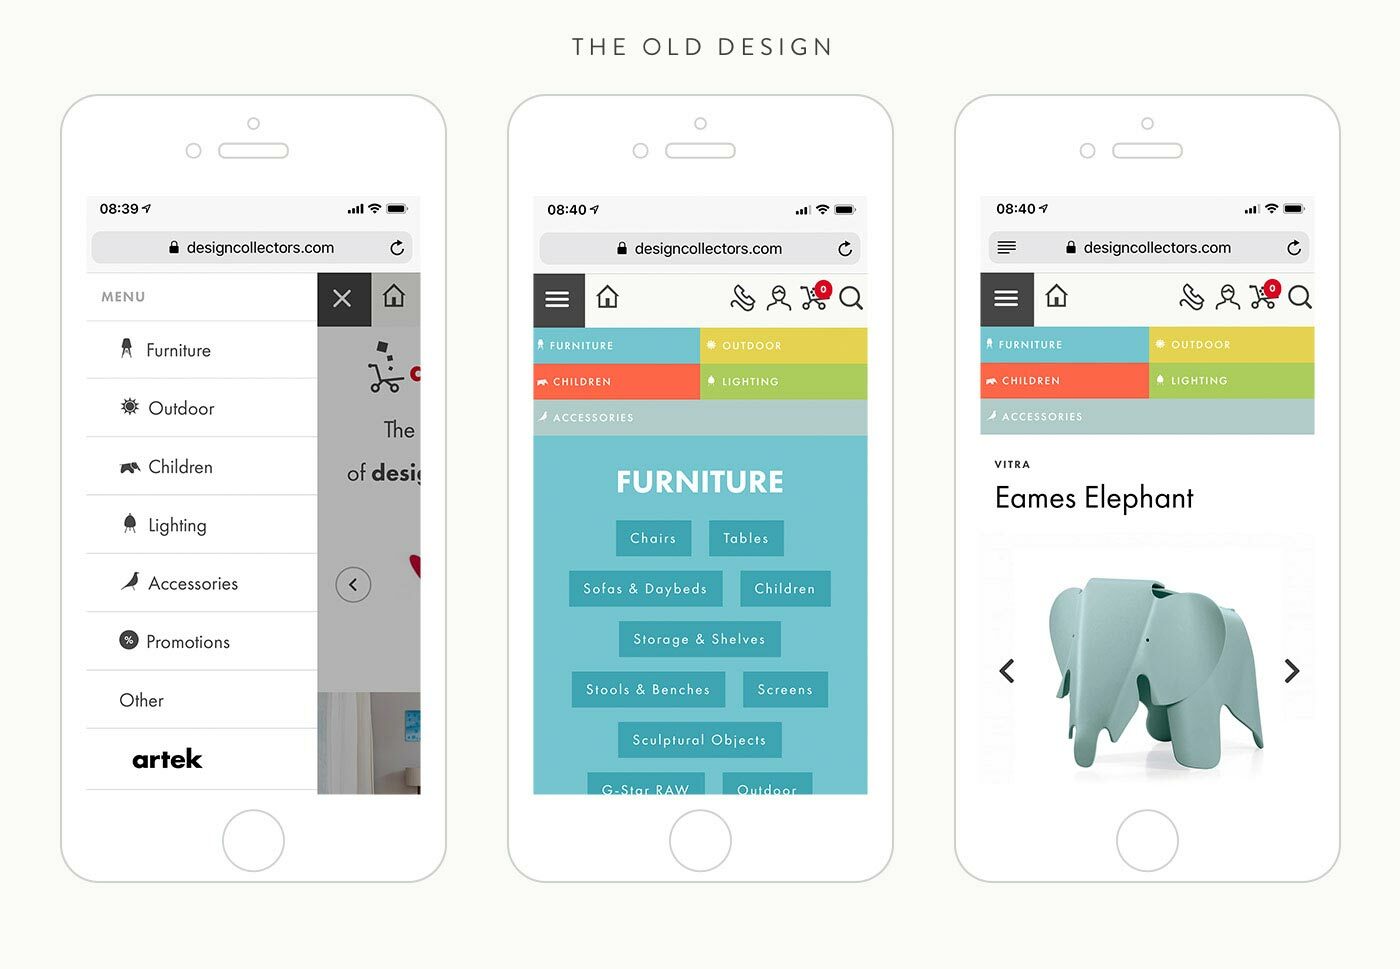 Designcollectors website on mobile, the old 2015 version